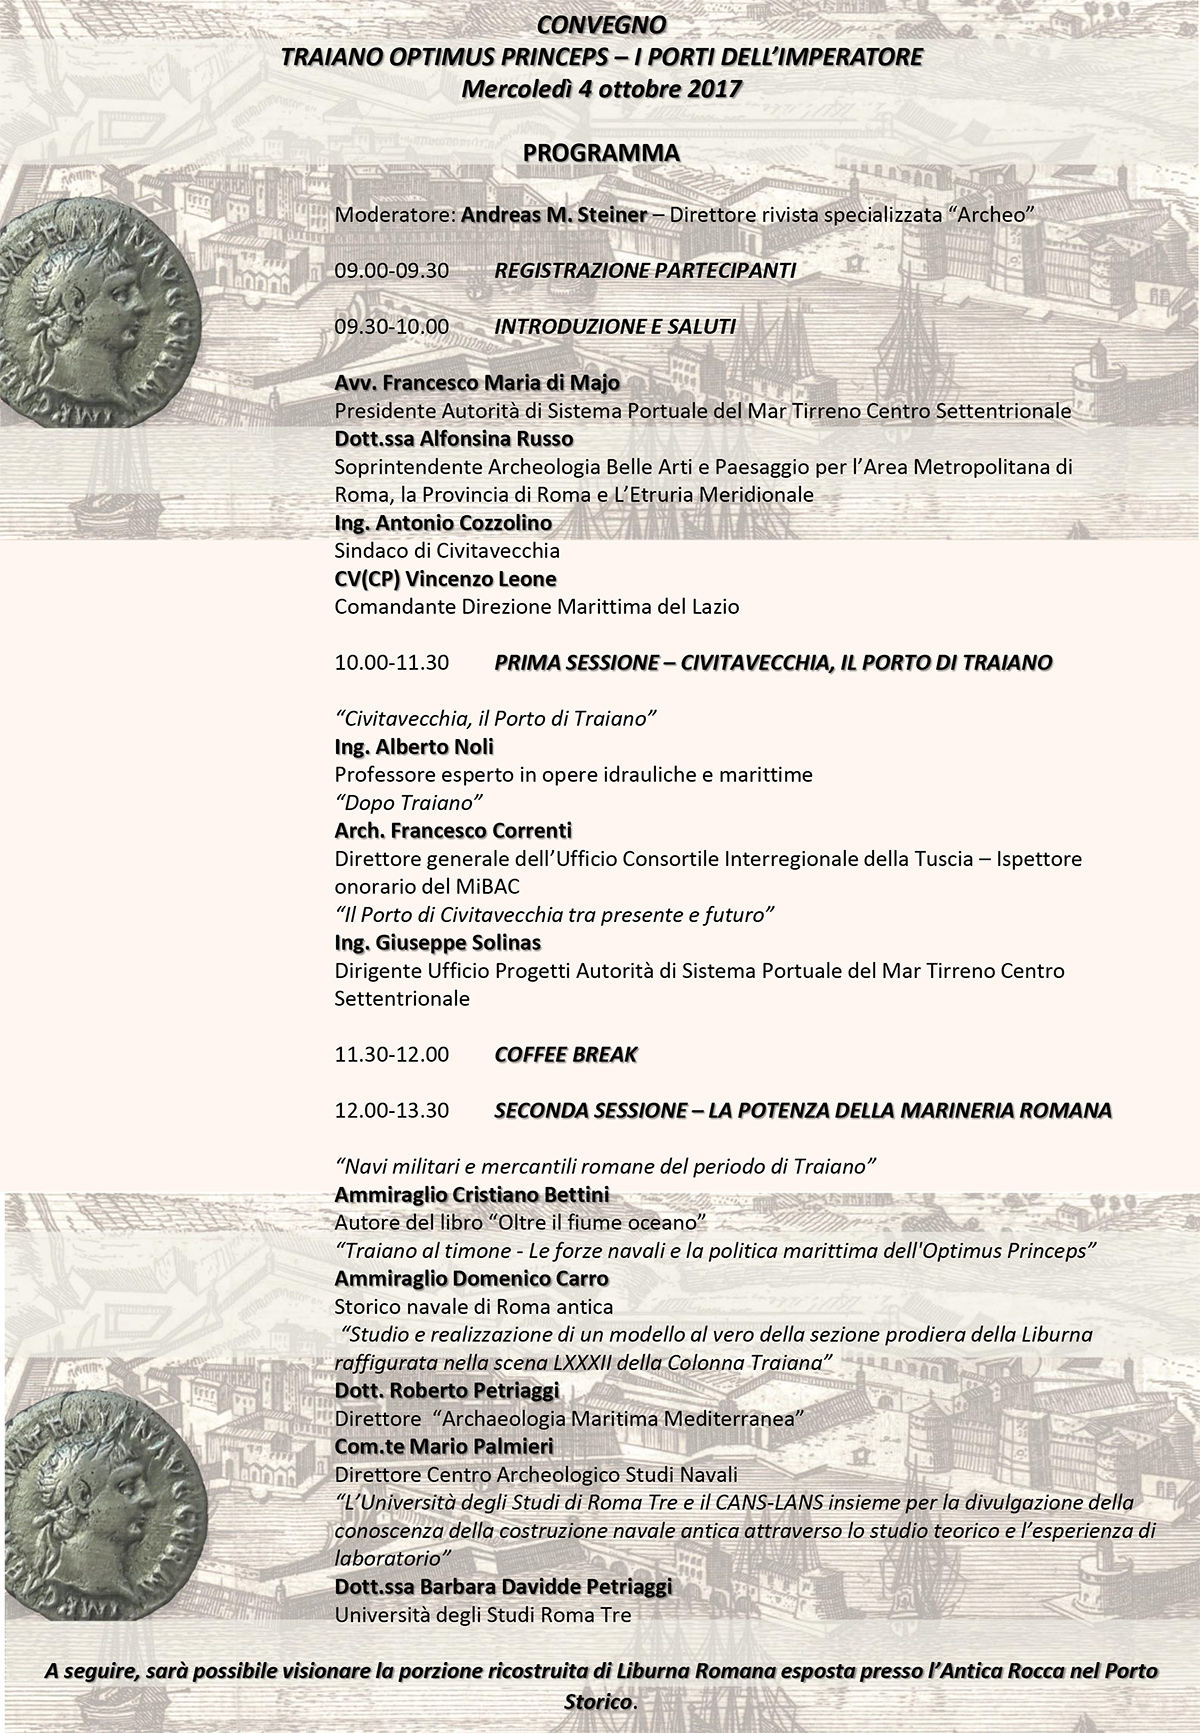 Programme of the Conference 